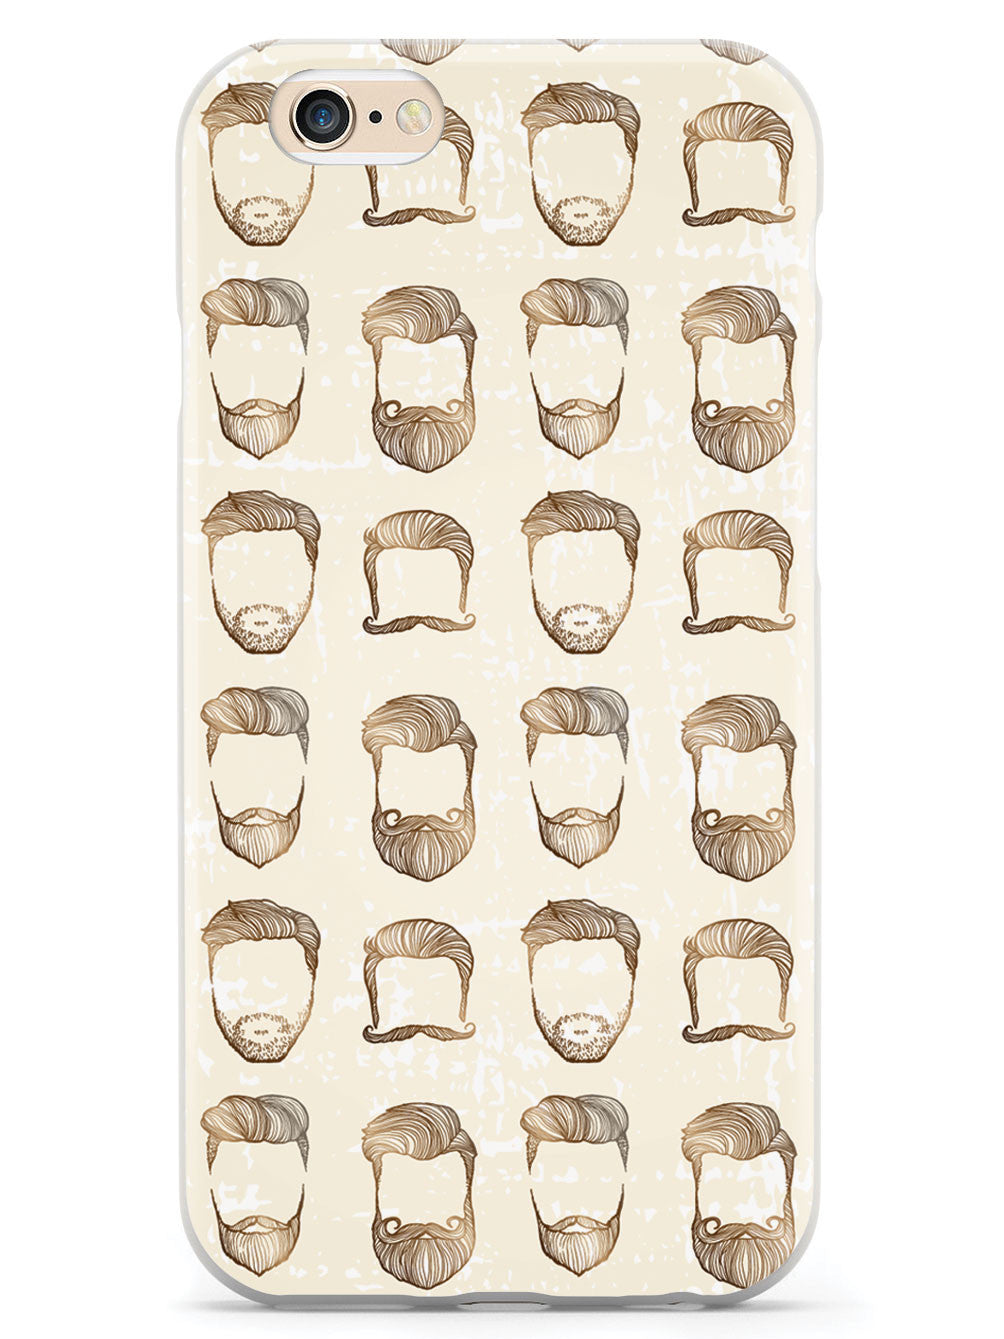 Men's Hairstyles, Magnificent Beards - Vintage Case